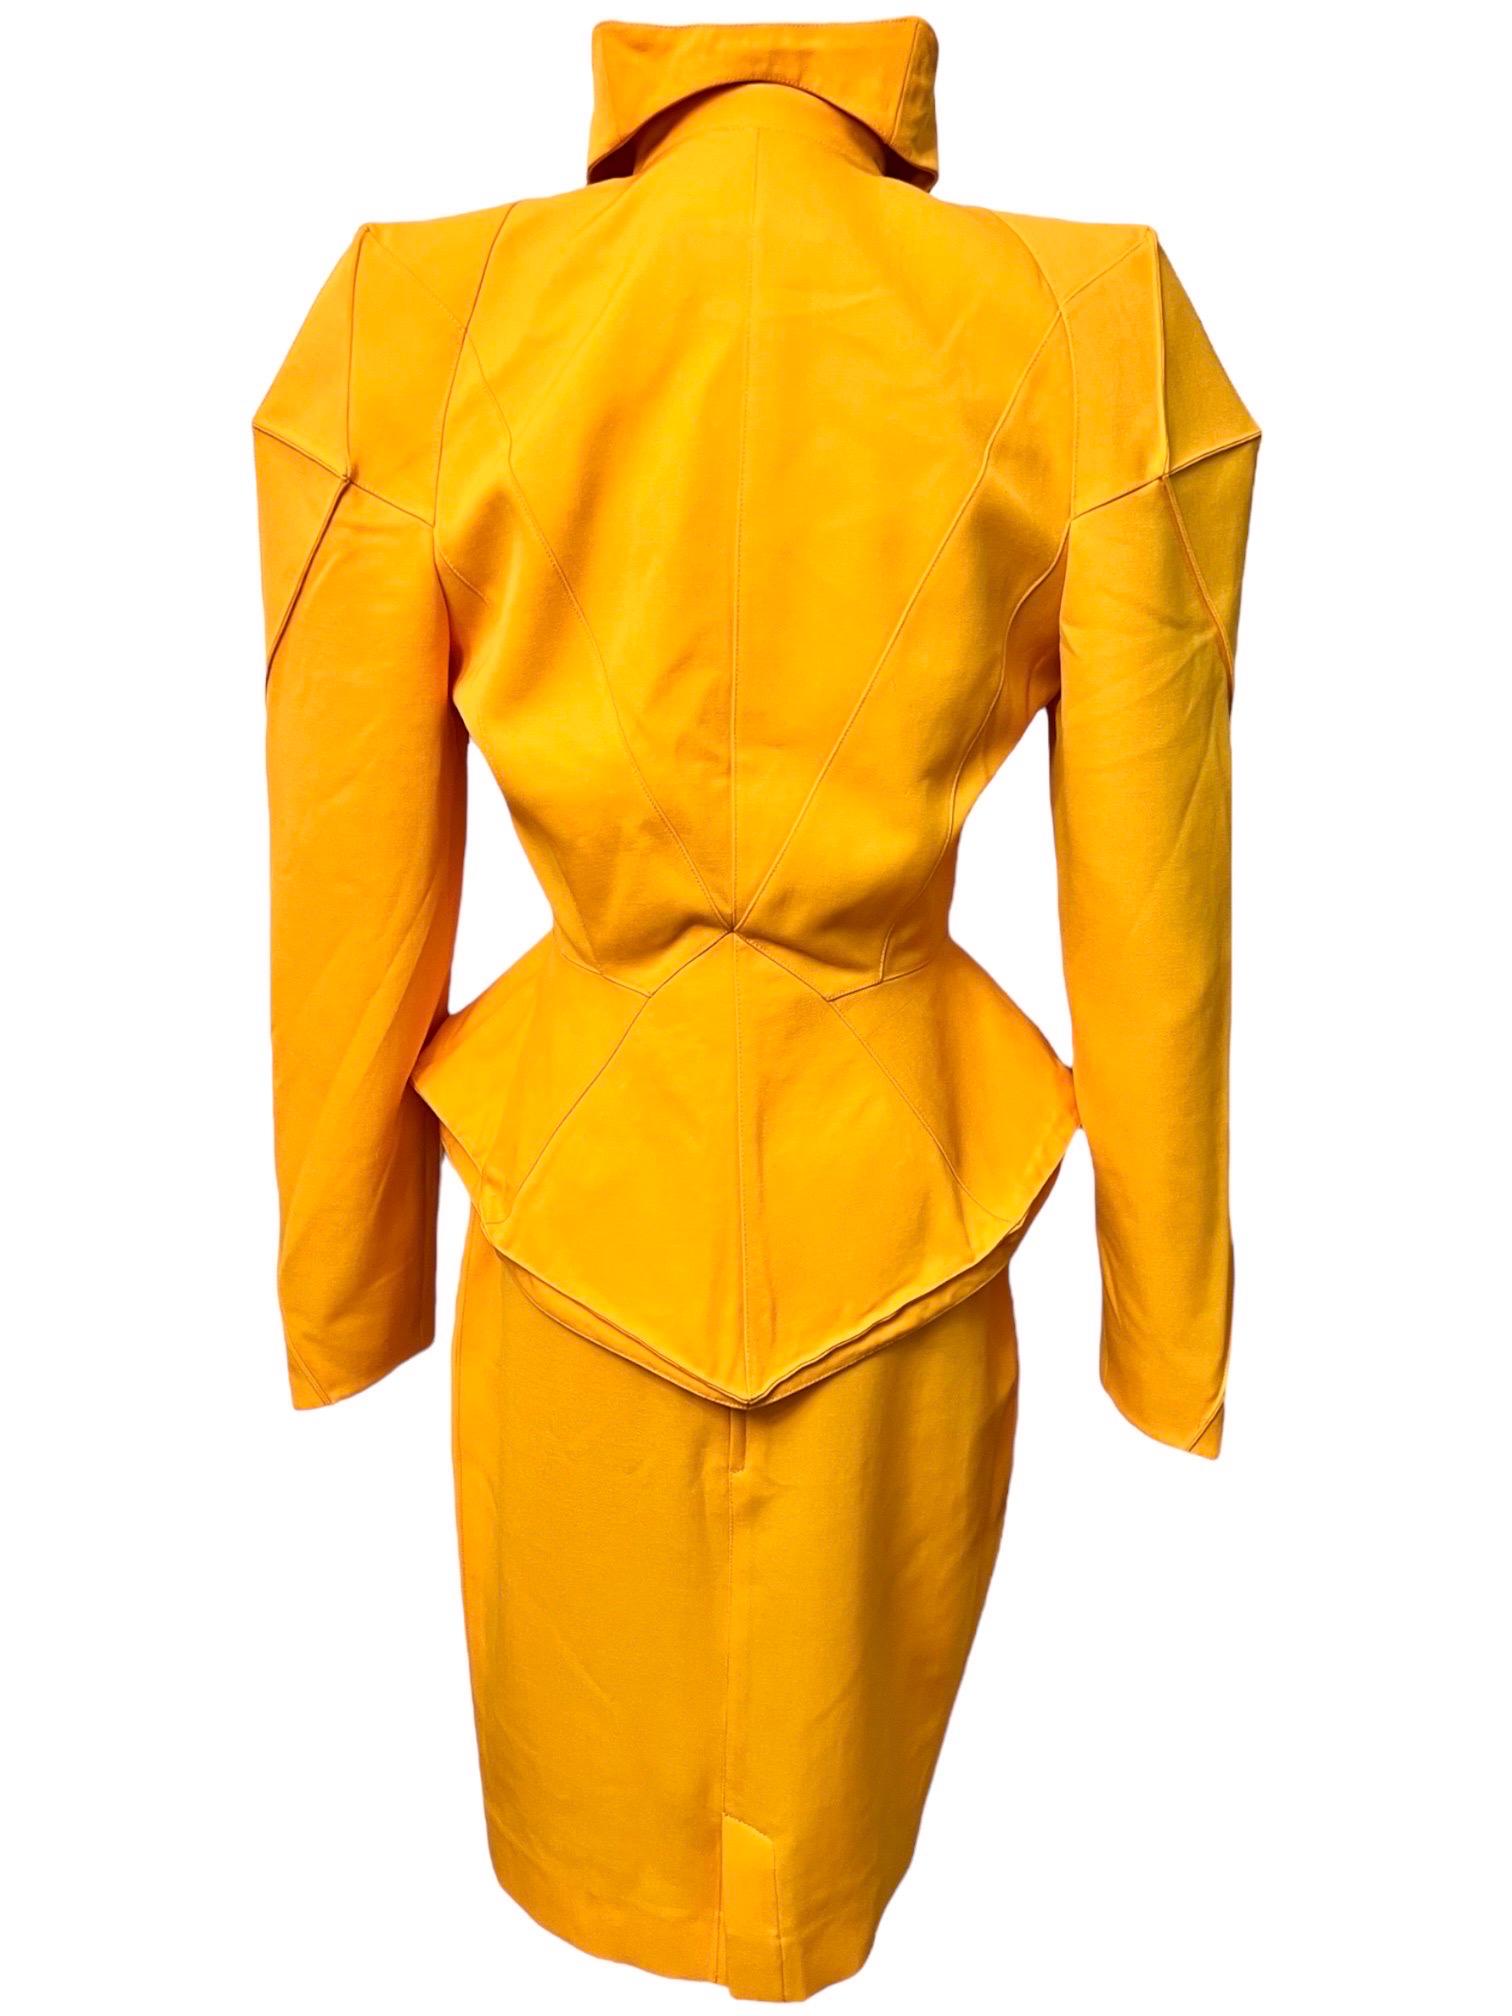 F/W 1991 Thierry Mugler Yellow Sculptural Skirt Suit For Sale 2